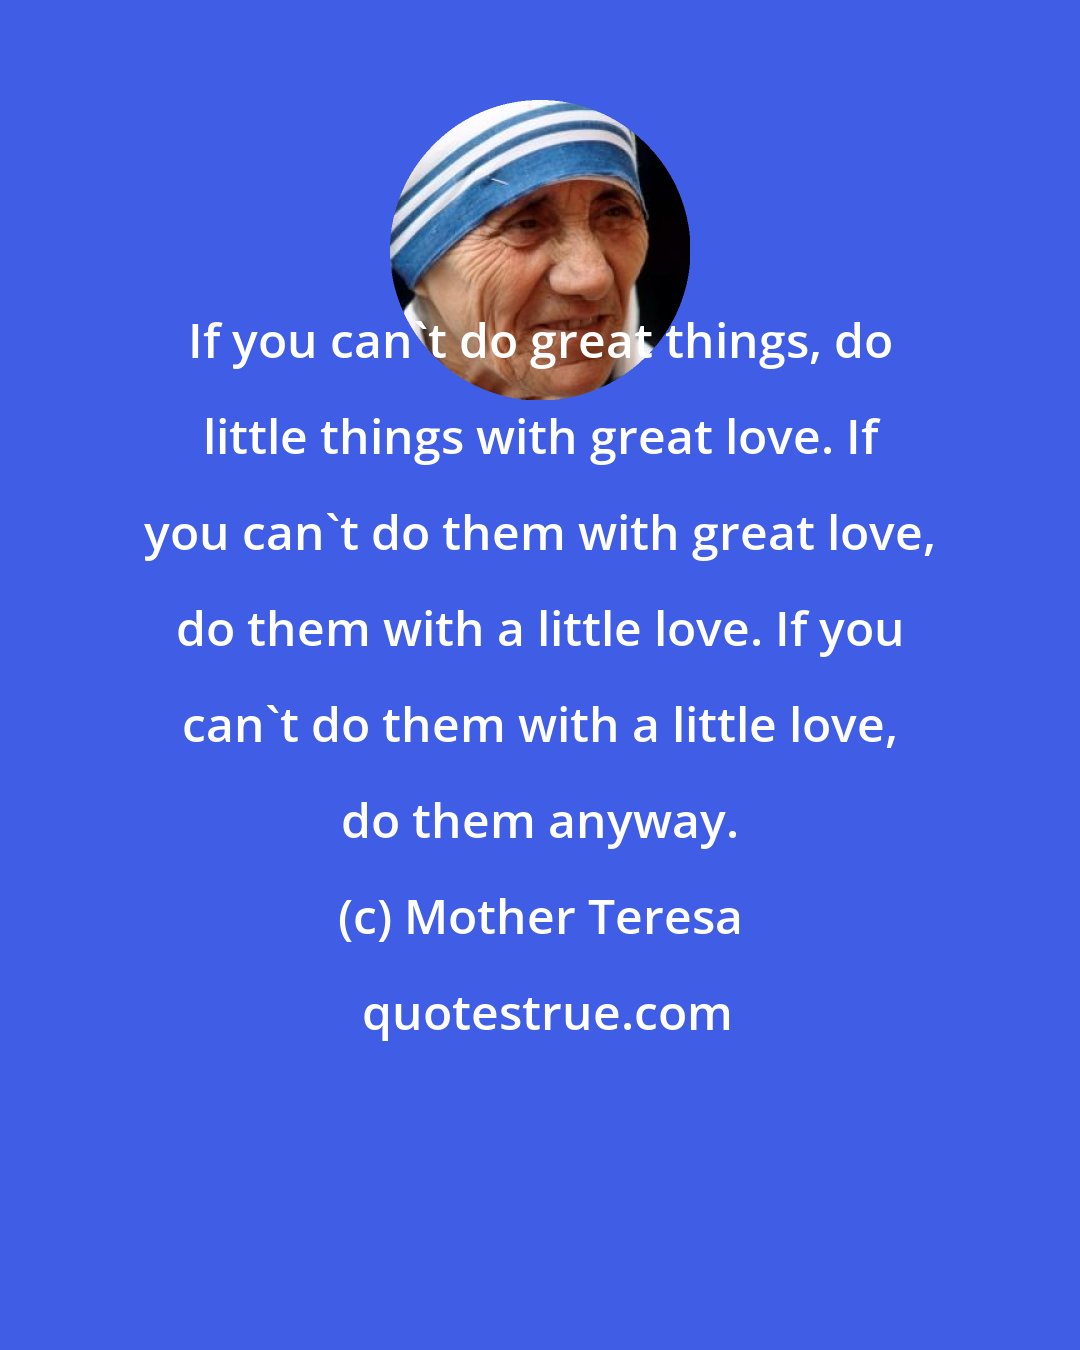 Mother Teresa: If you can't do great things, do little things with great love. If you can't do them with great love, do them with a little love. If you can't do them with a little love, do them anyway.